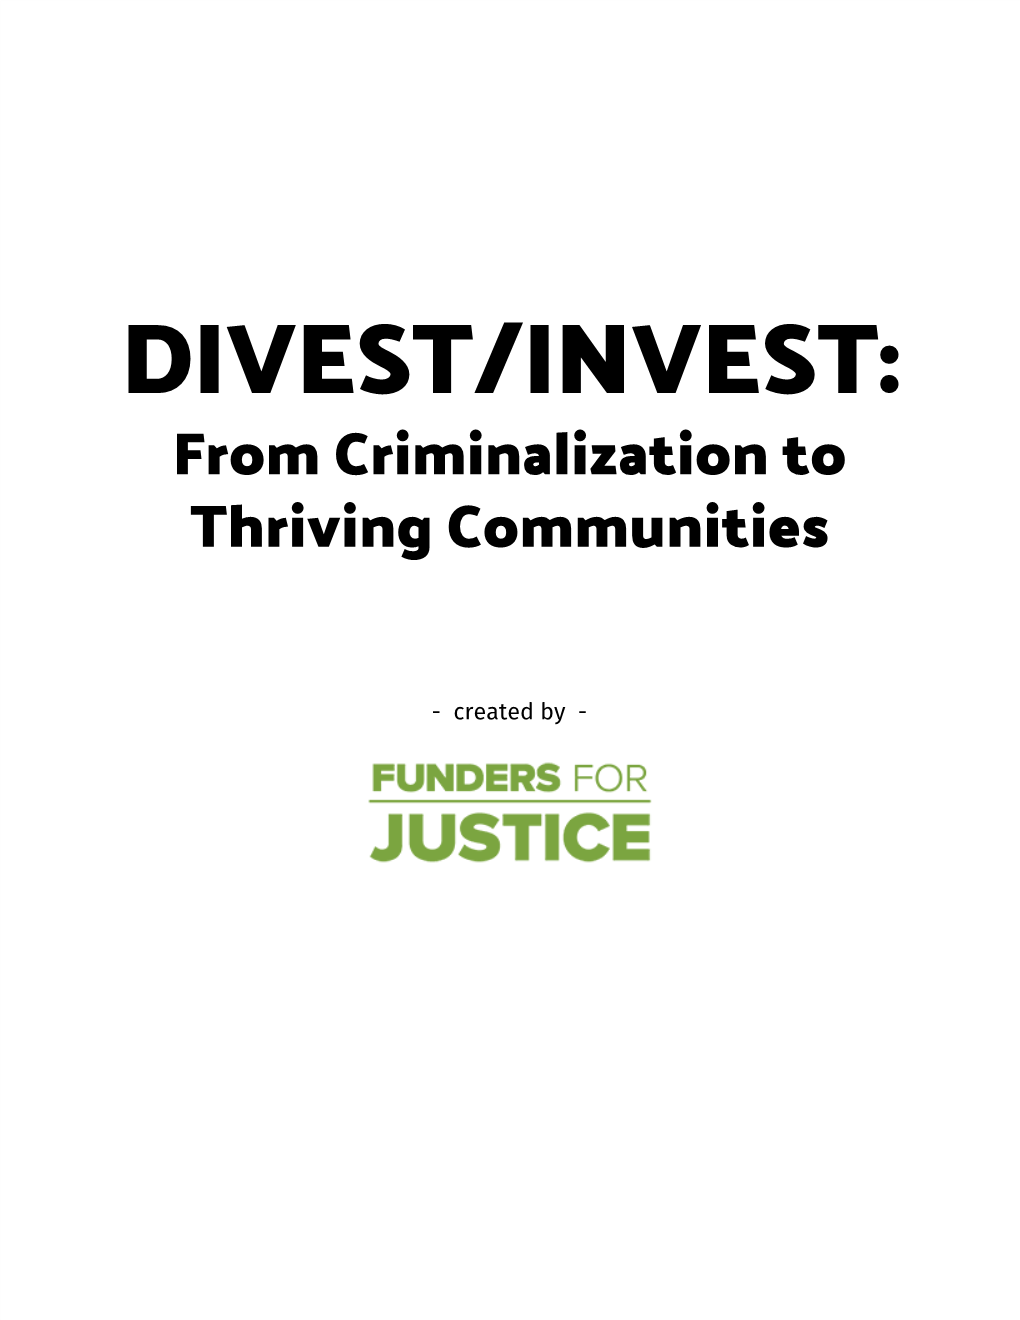 Divest/Invest Groups and Campaigns